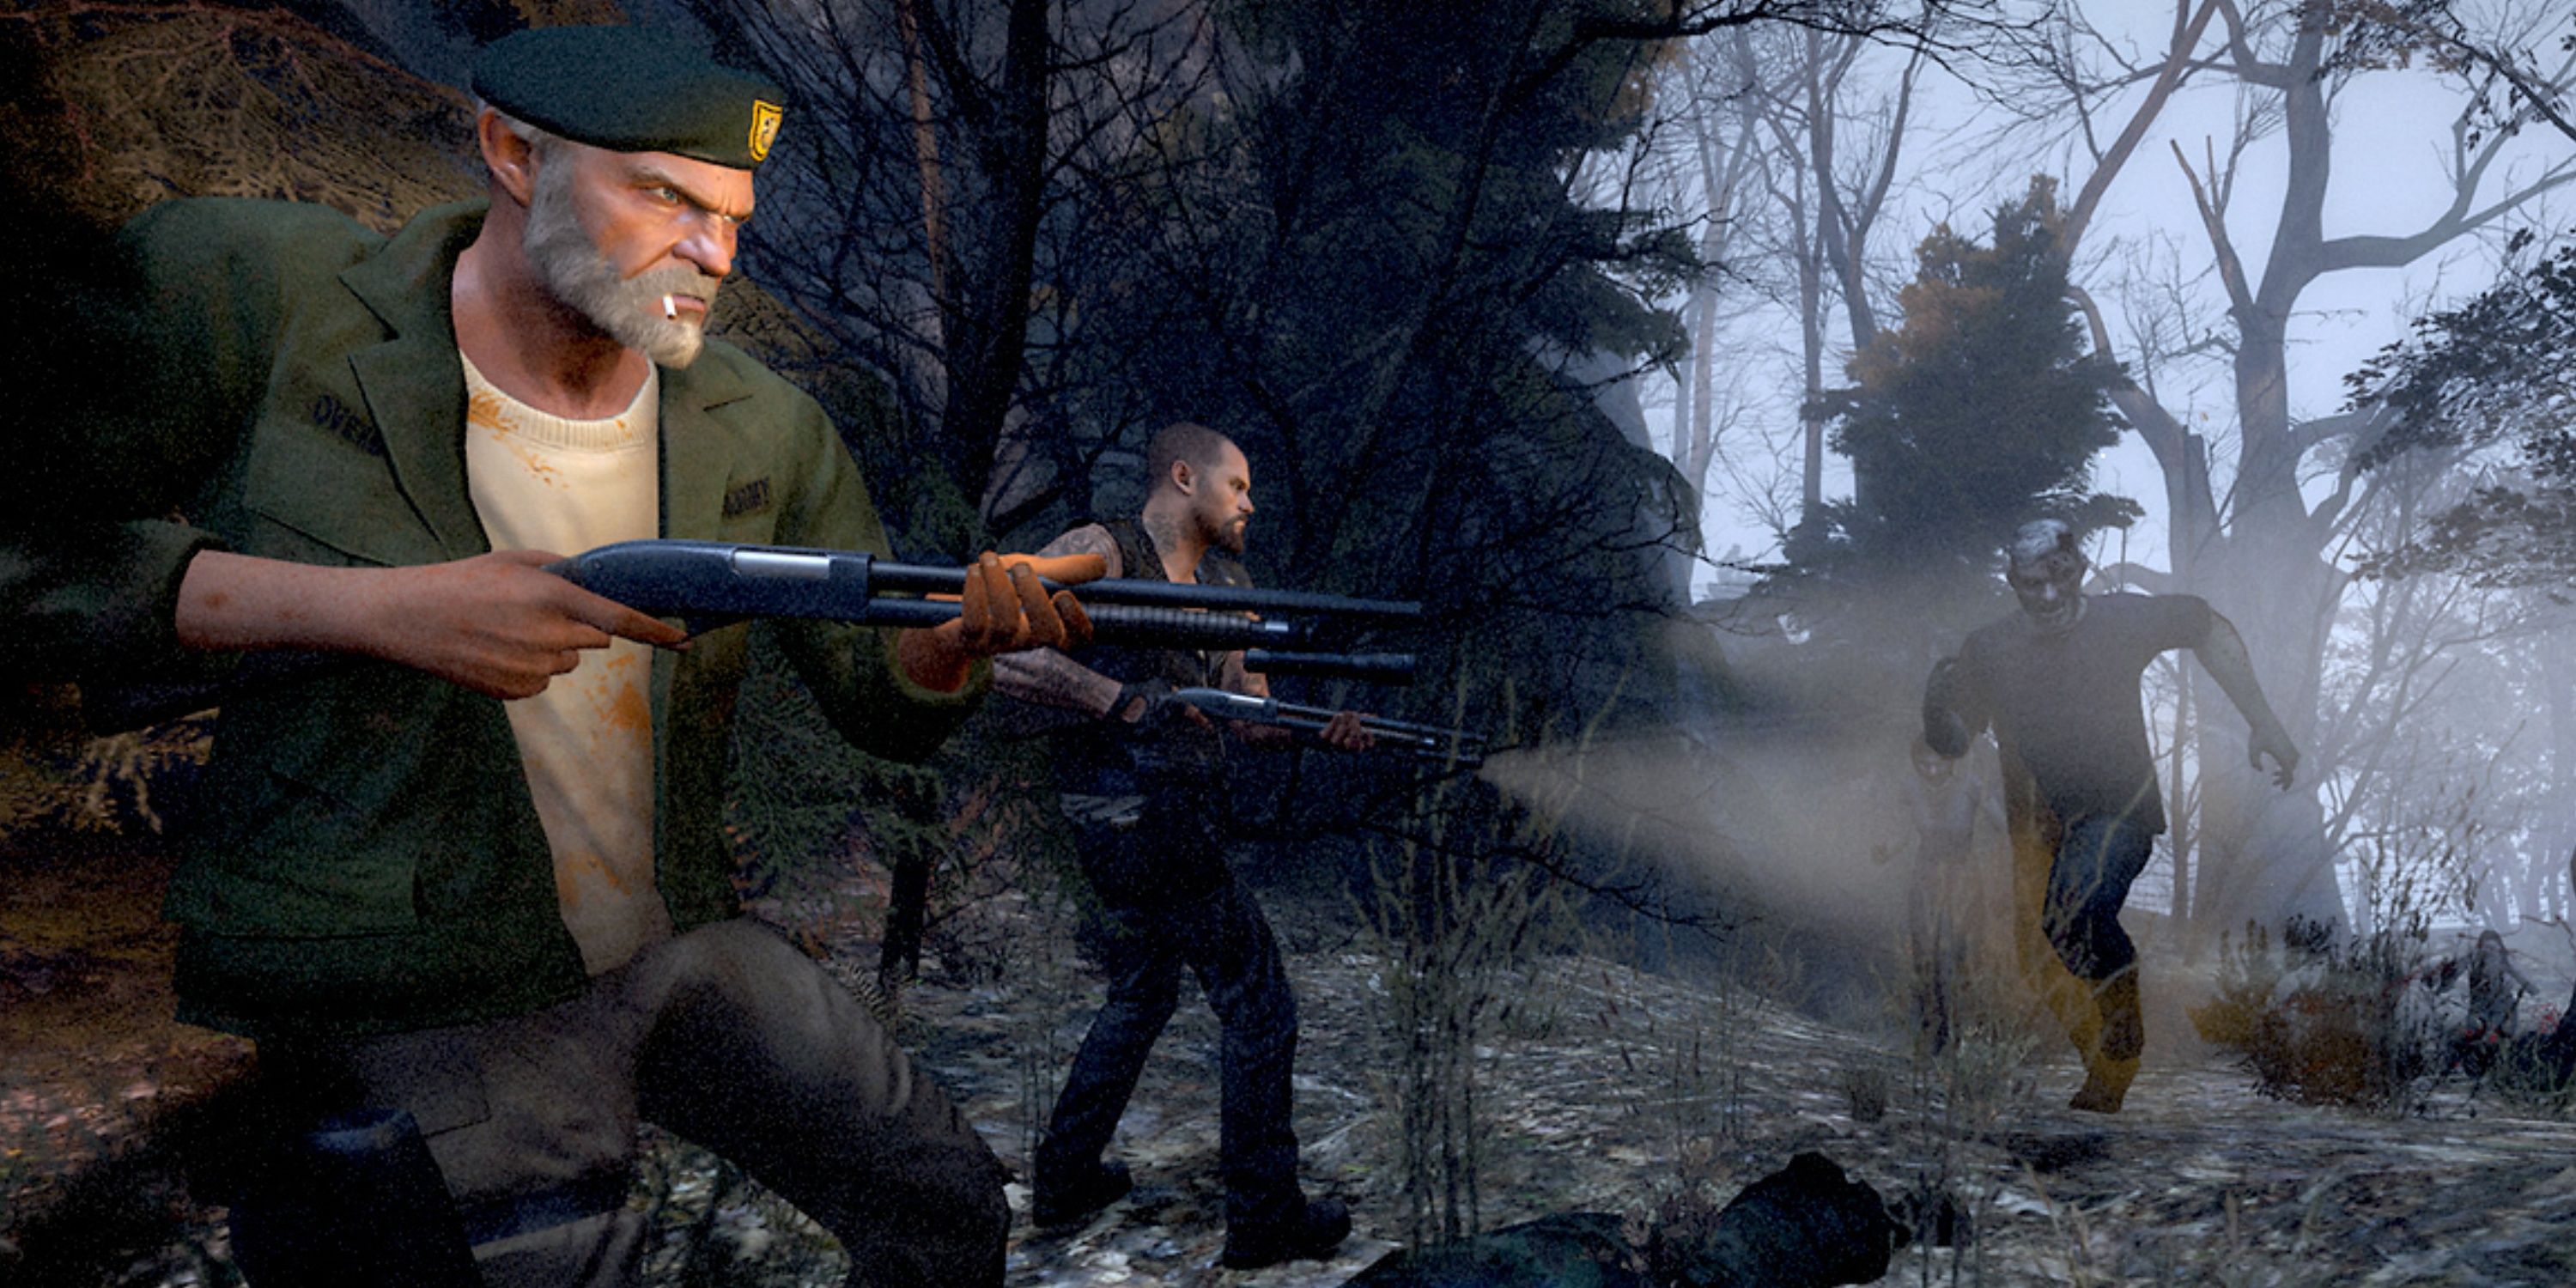 bill and francis killing zombies in the forest